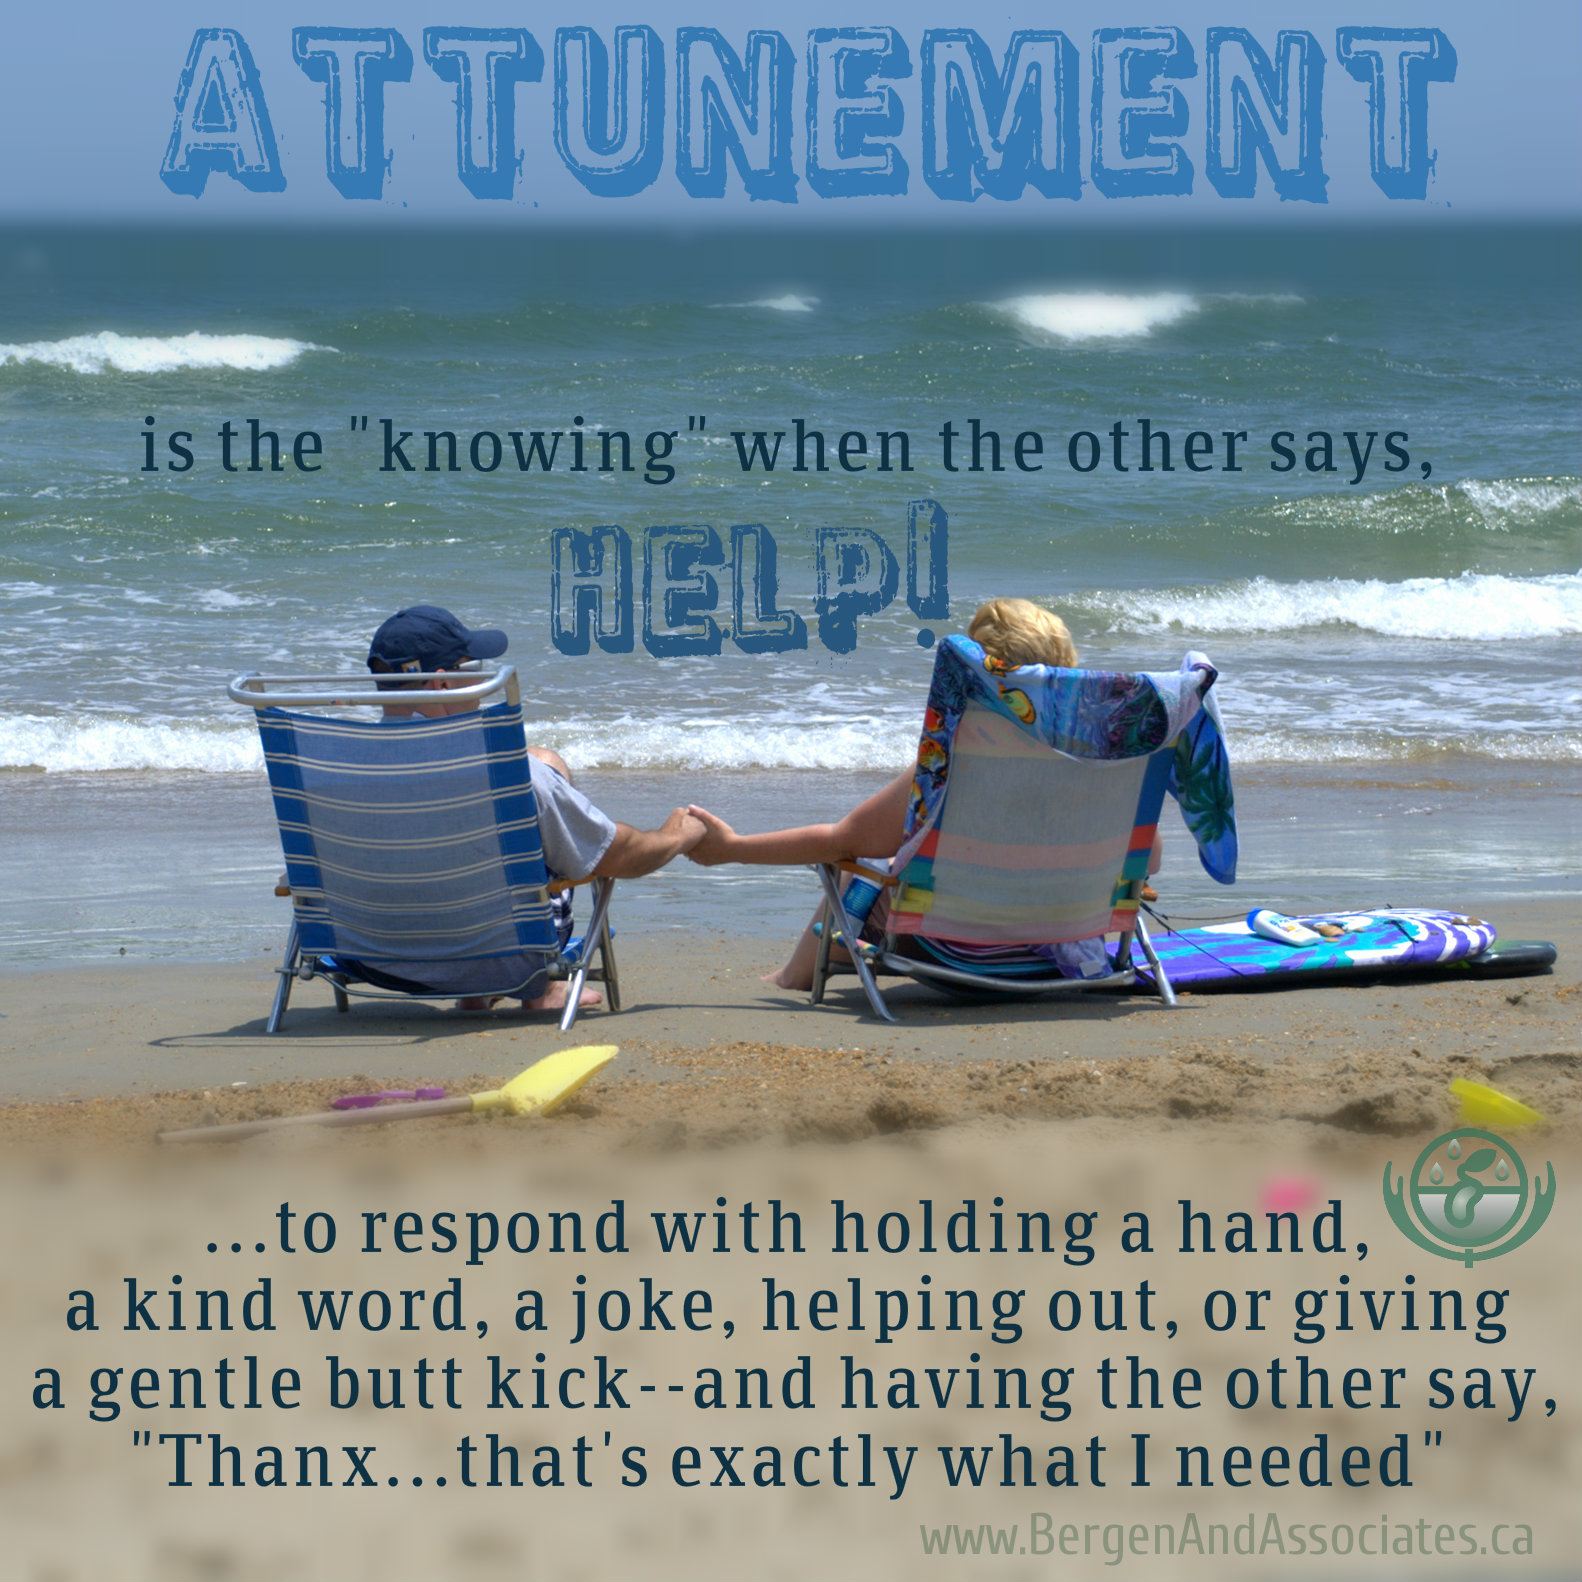 Attunement is knowing when the other says, "Help" to respond with a gentle touch, a hug, a rebuke or a gentle kick in the pants, and hearing the other person say, "Thanx, that's exactly what I needed"